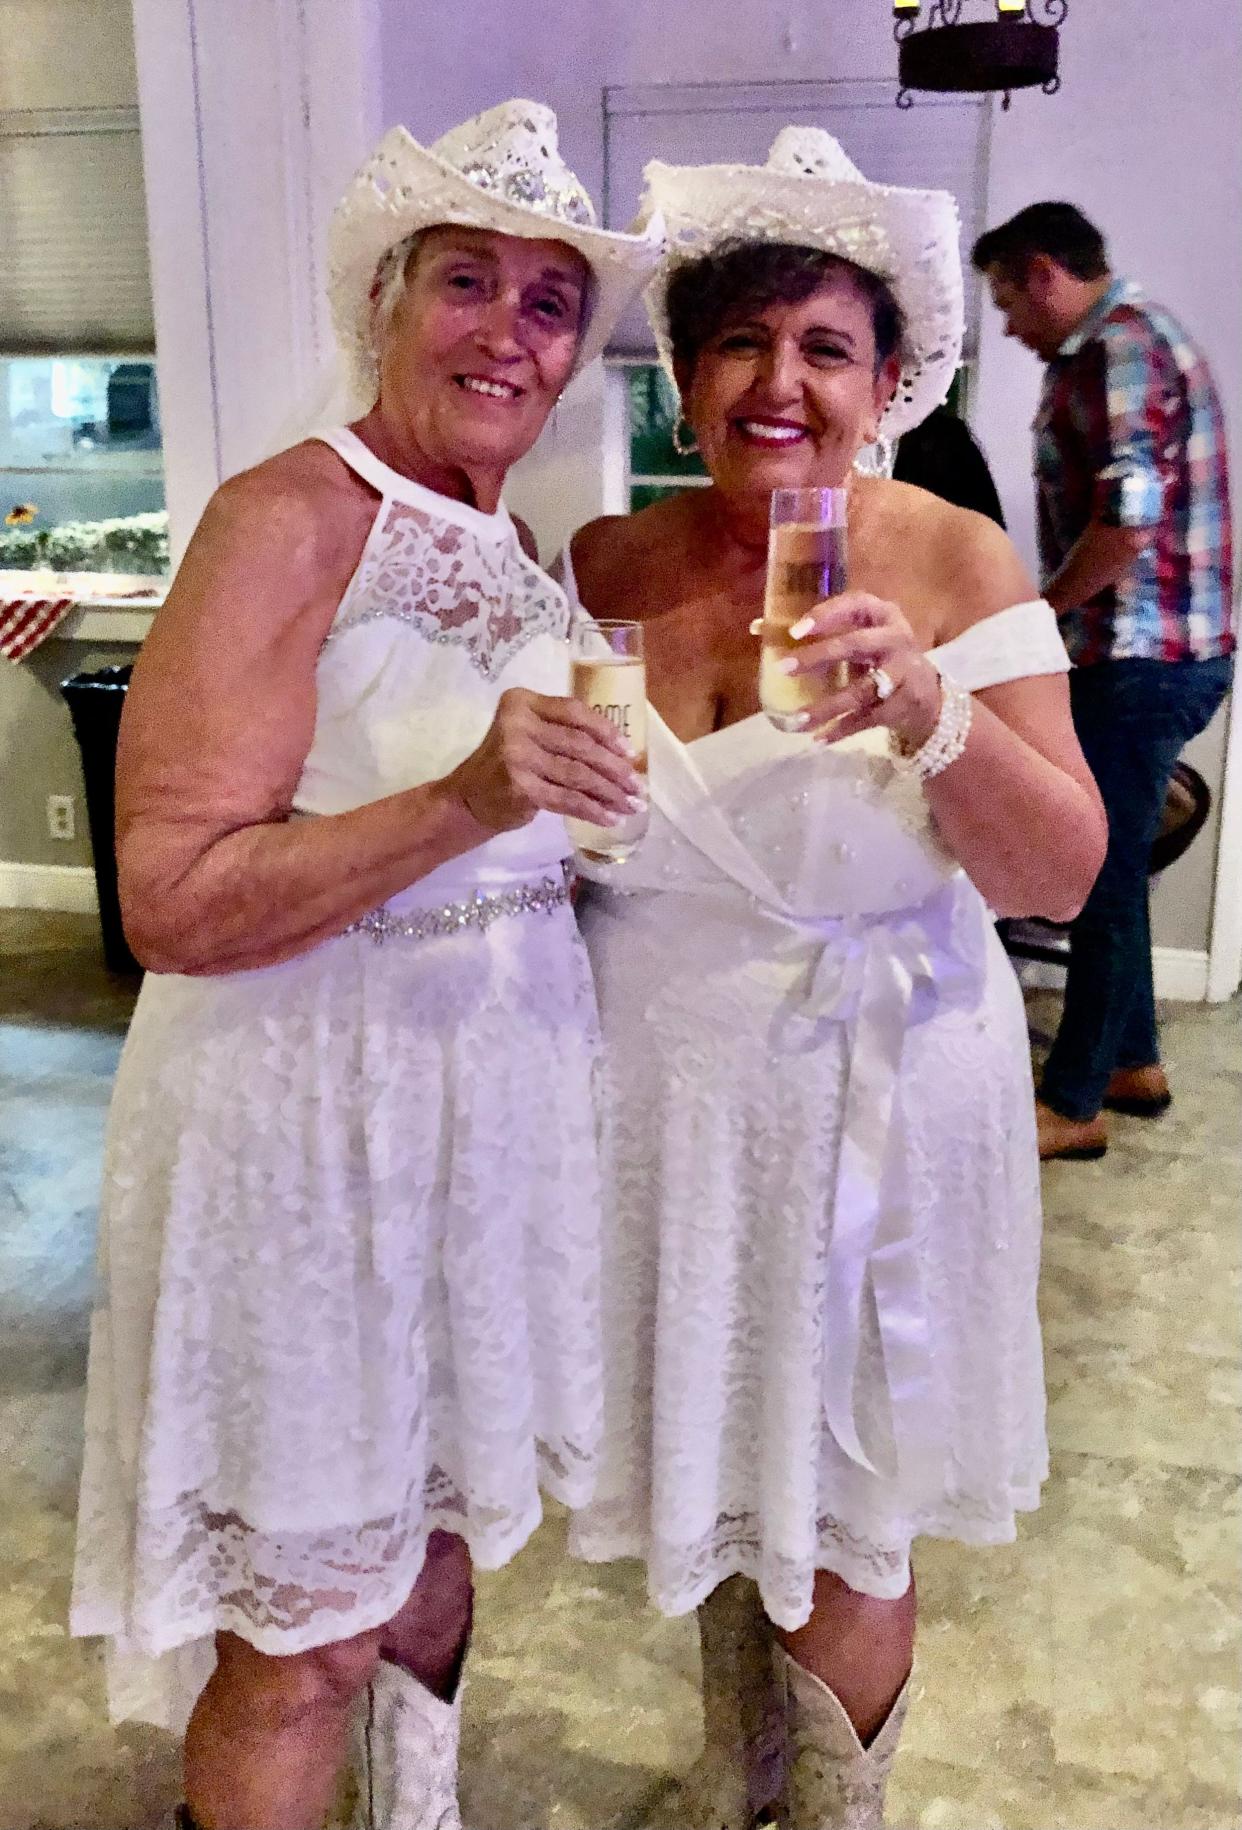 Former childhood best friends Dorothy, left, and Rosemary Marshall celebrated their wedding just seven months after reuniting for the first time in 50 years.